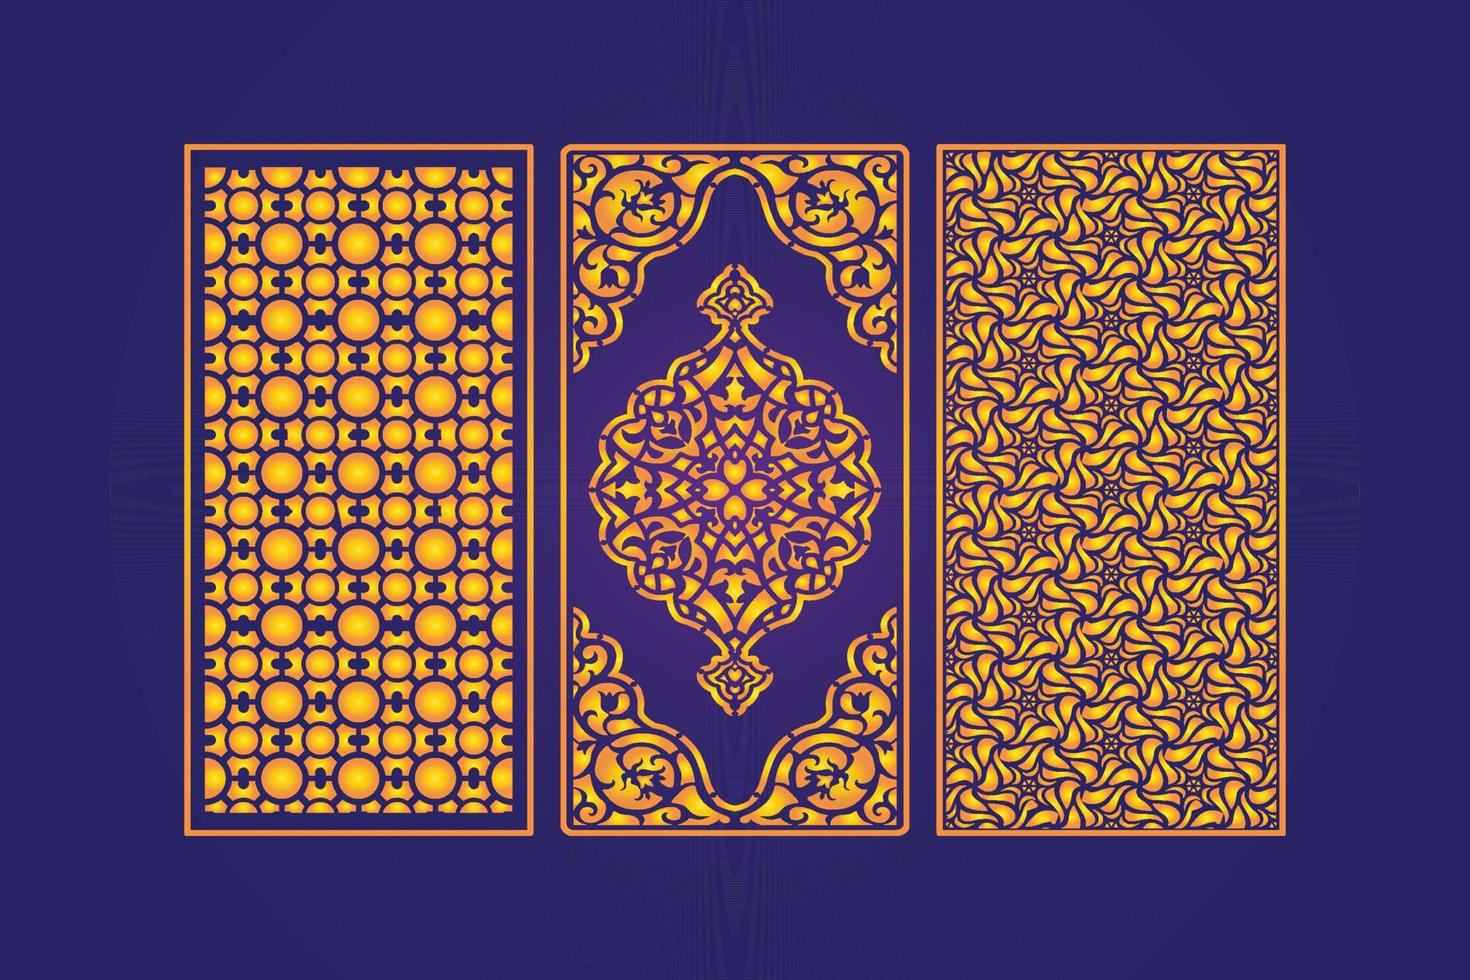 Decorative Die Cut Floral islamic Abstract Pattern Laser Cut Panels Template Gold vector